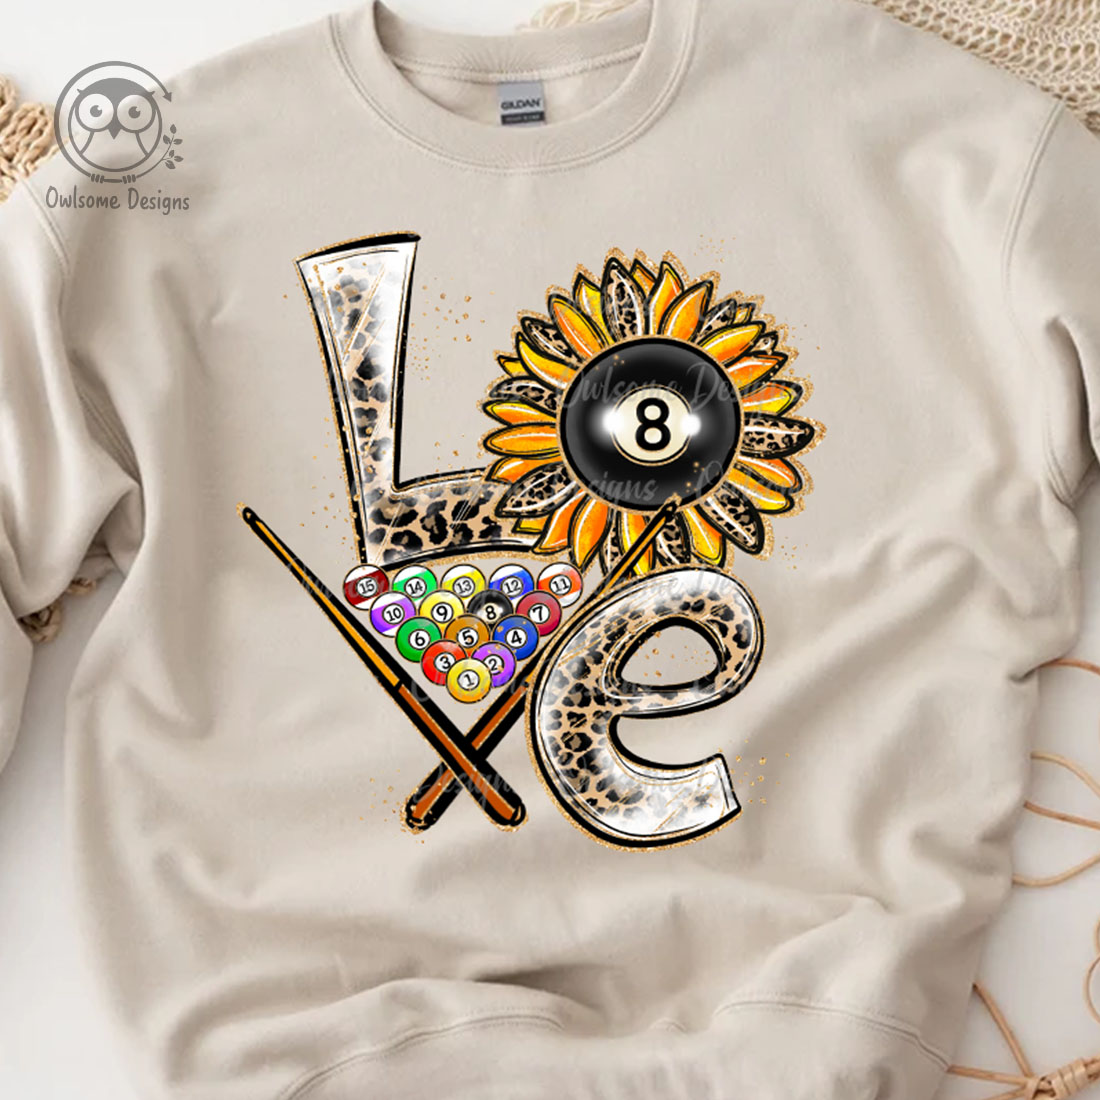 Image of a sweatshirt with an amazing inscription Love with billiard elements.